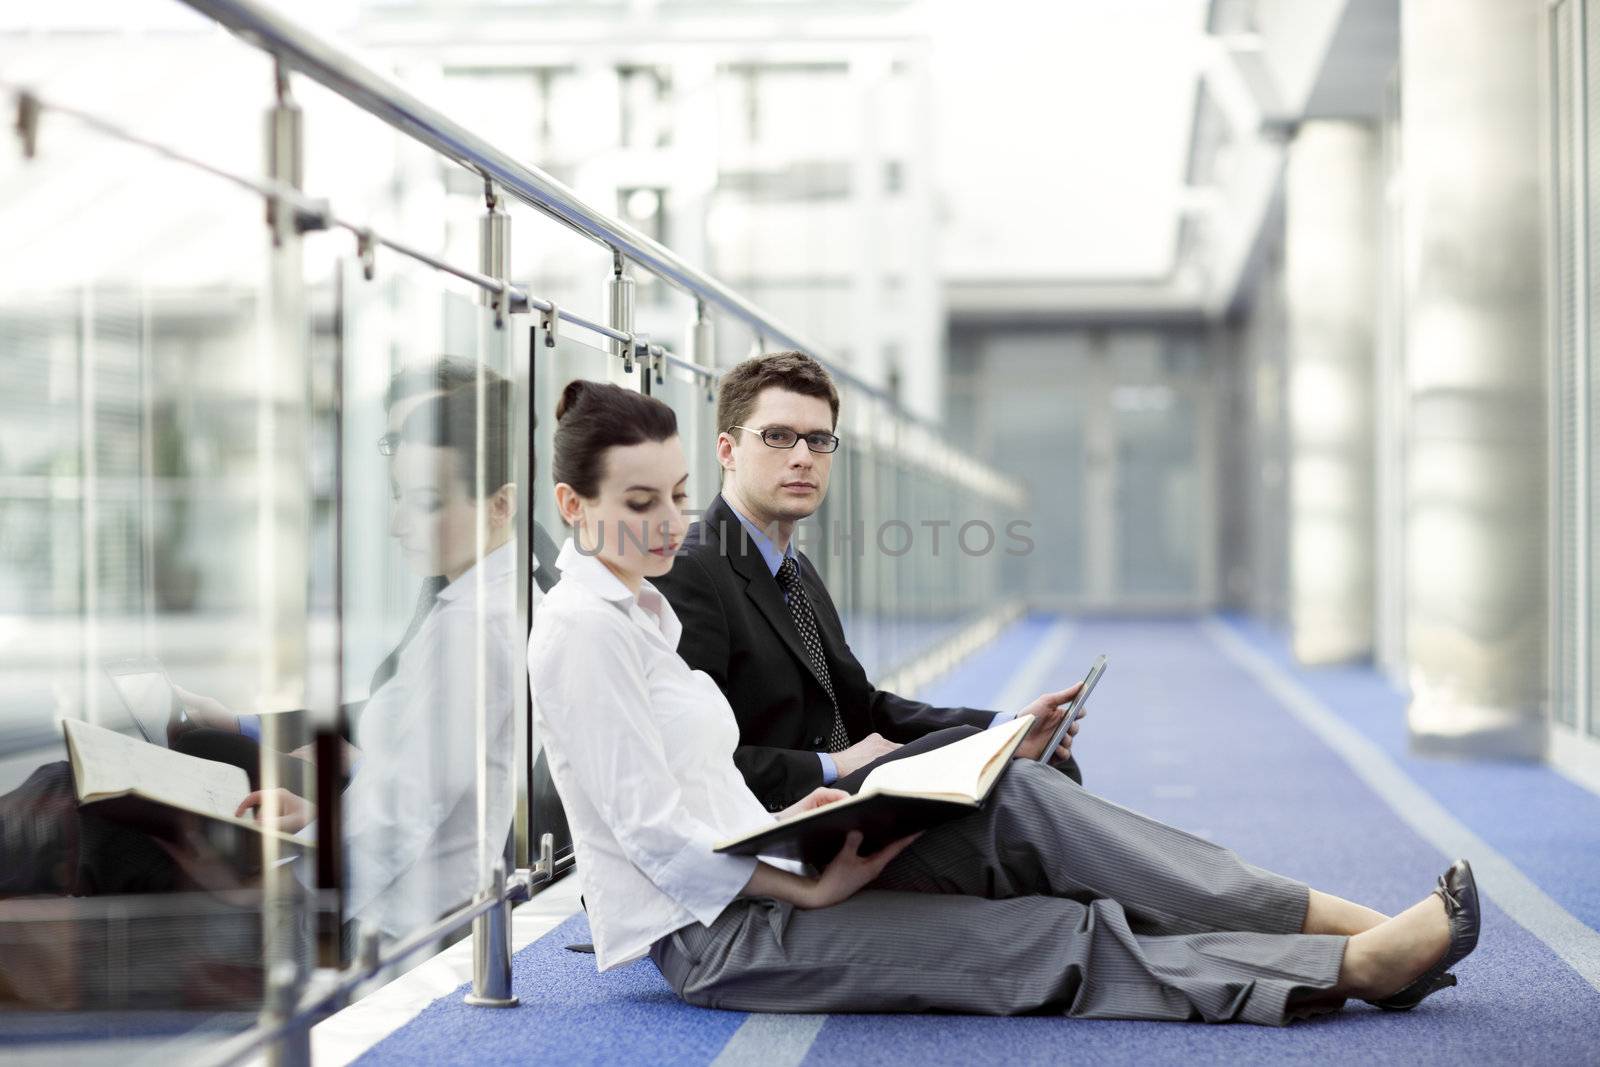 Business couple portrait - young man and woman working together on the floor of modern office corrdor